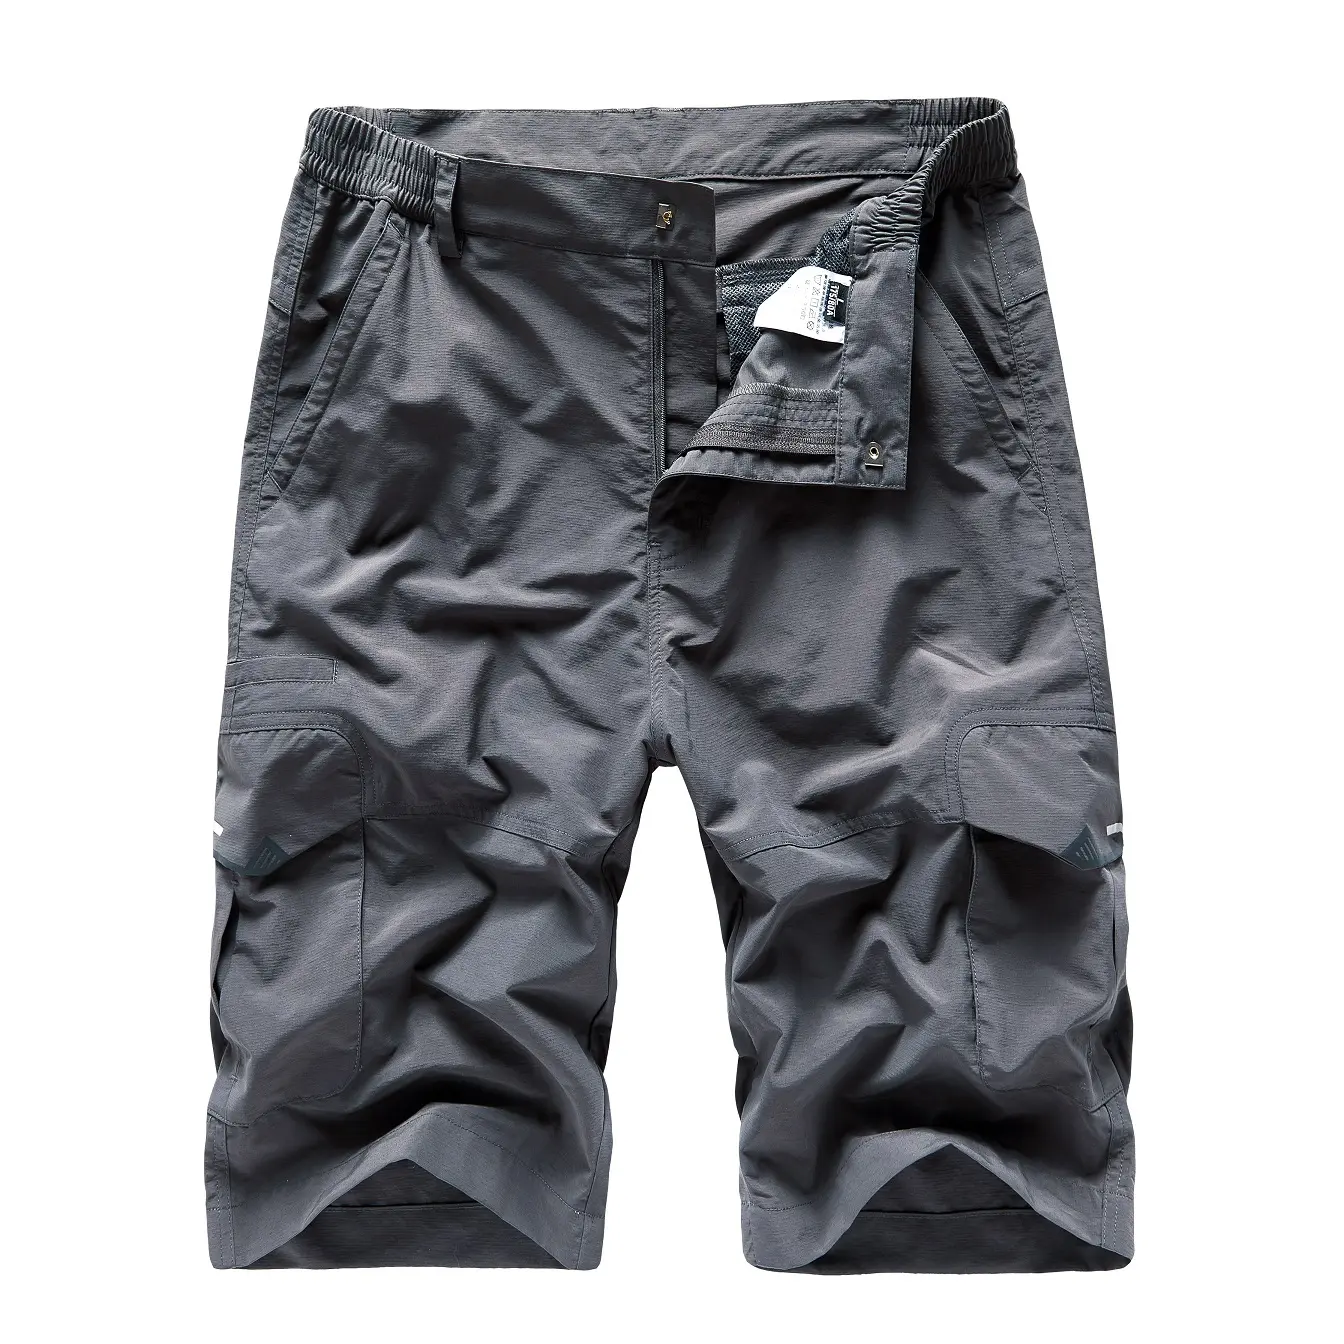 Outdoor Sports Quick Dry Pants Summer Side Pockets Breathable Mens Cargo Sports Short